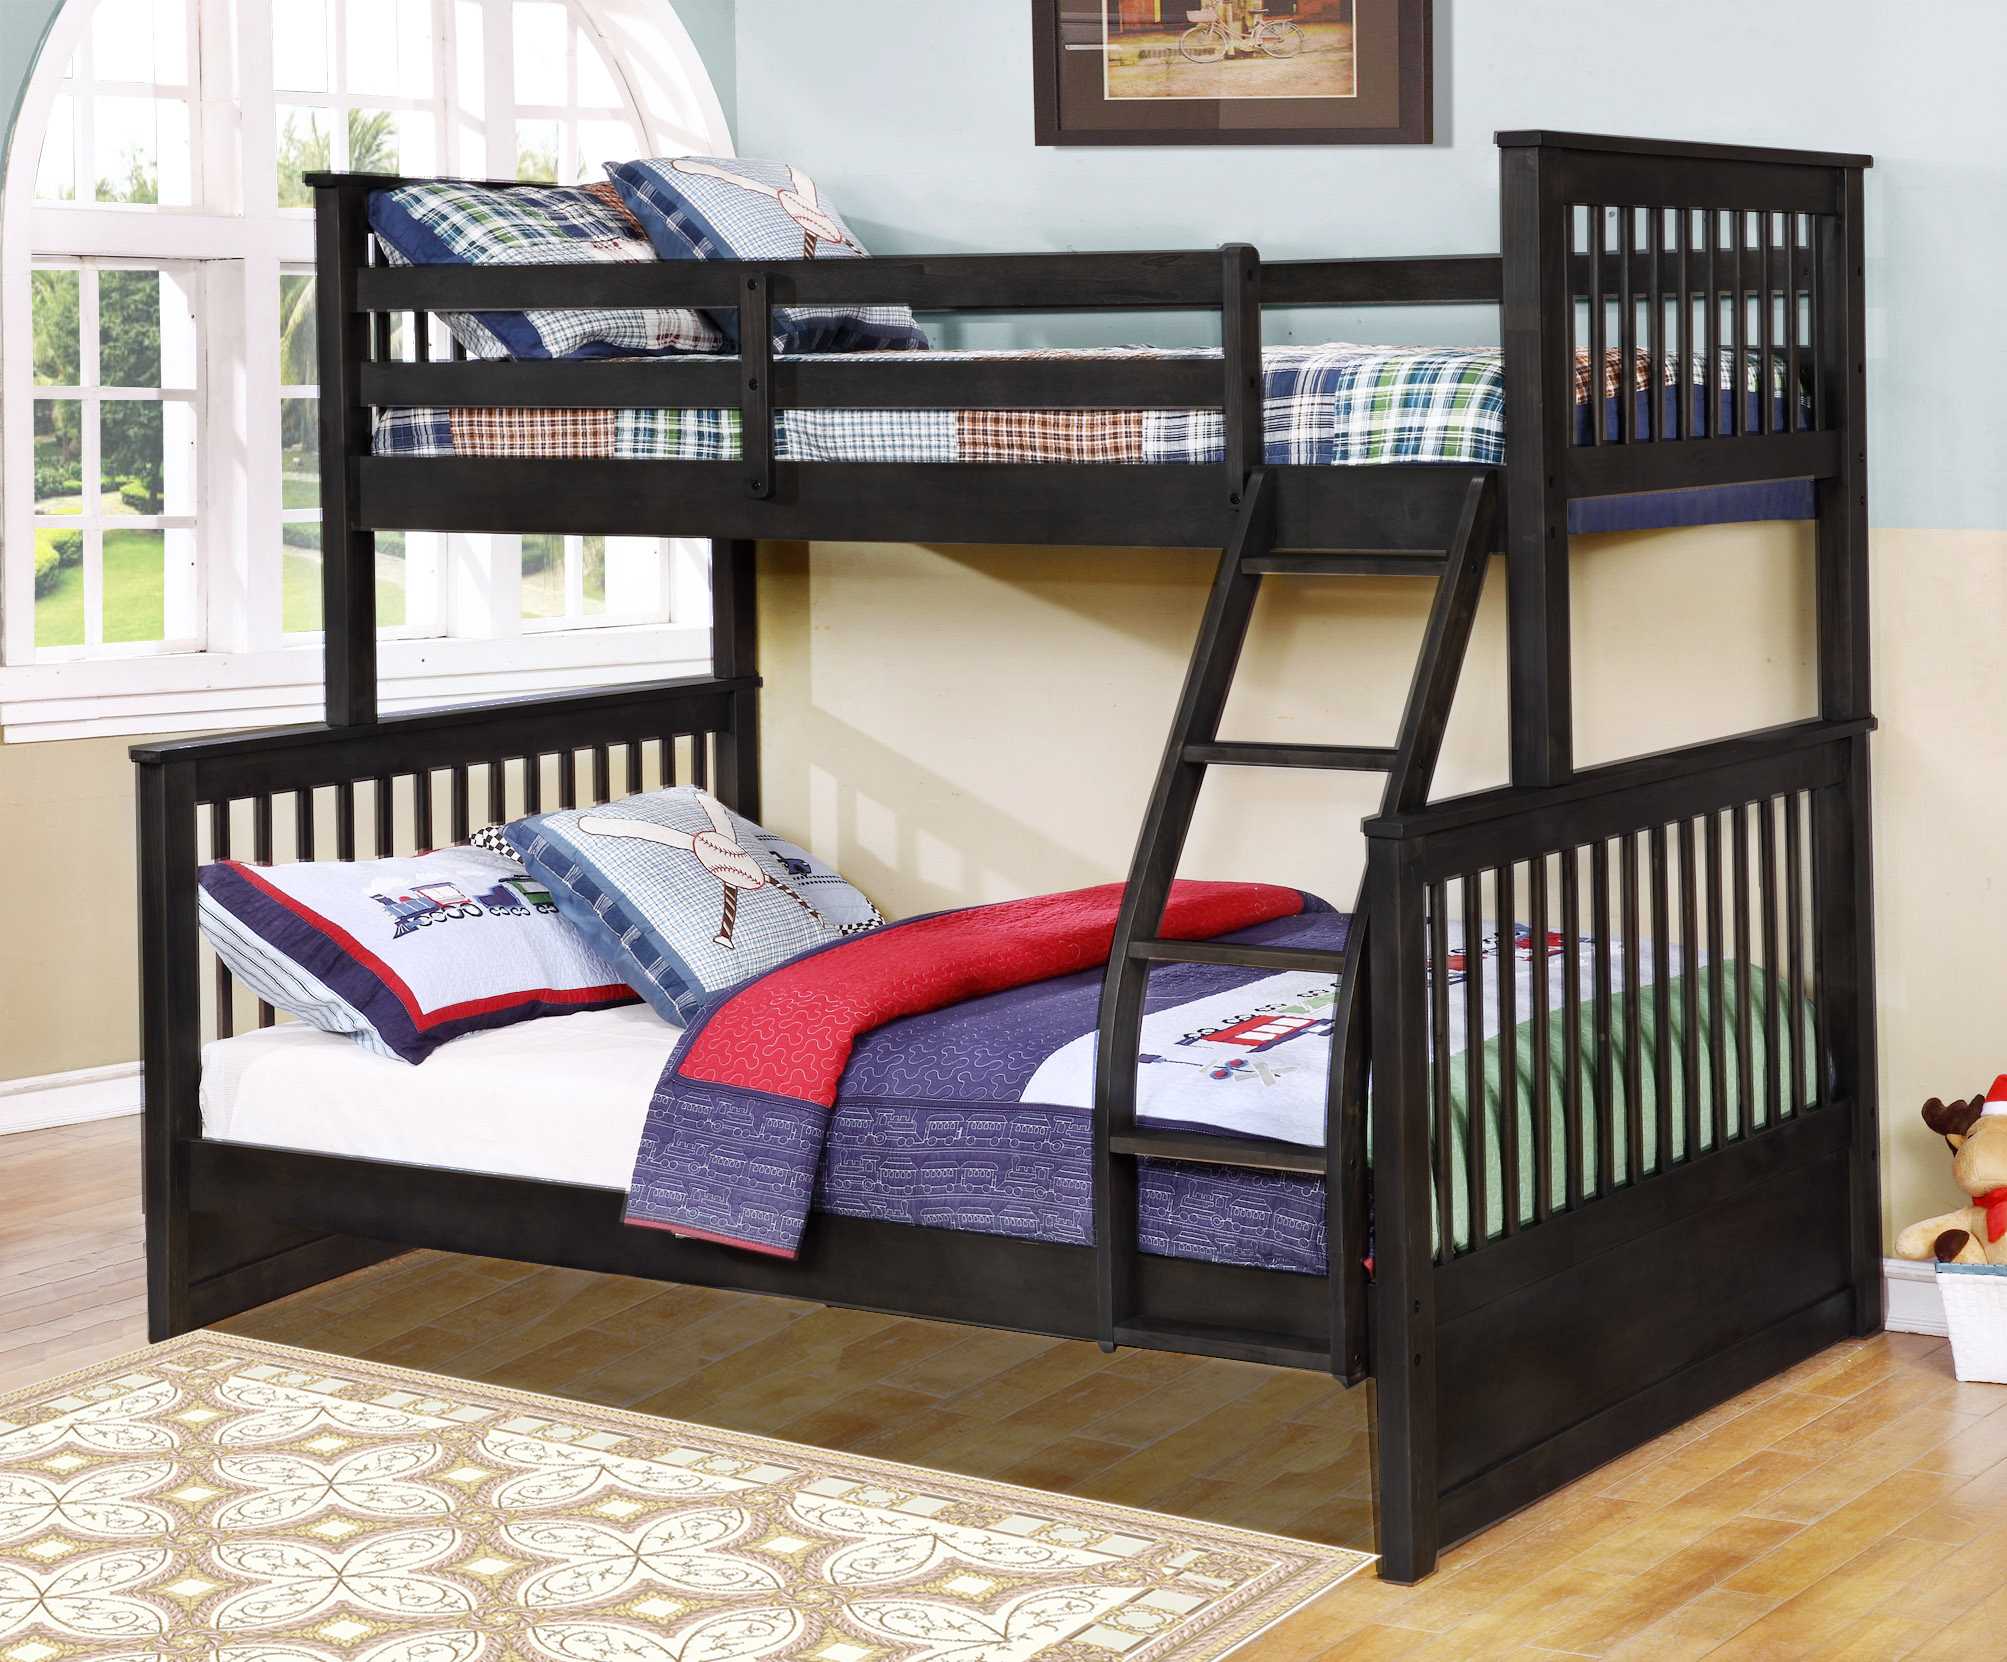 80.5" X 41.5-57.5" X 70.25" Charcoal Manufactured Wood and Solid Wood Twin or Full Bunk Bed